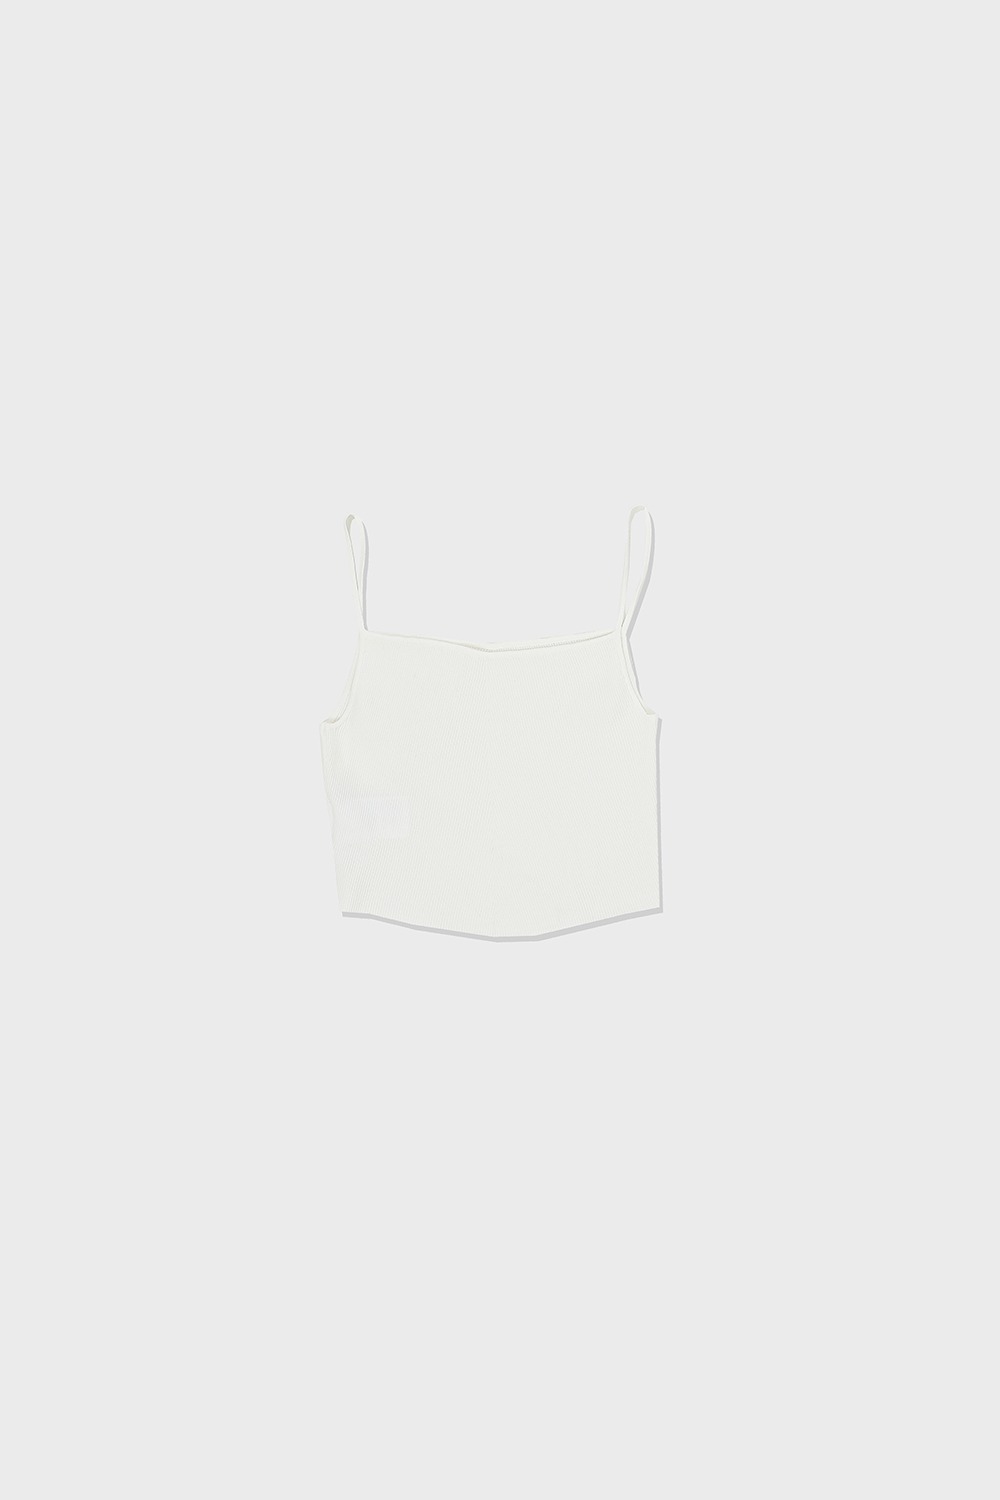 KNITTED SLEEVELESS CROP TOP - WHITE